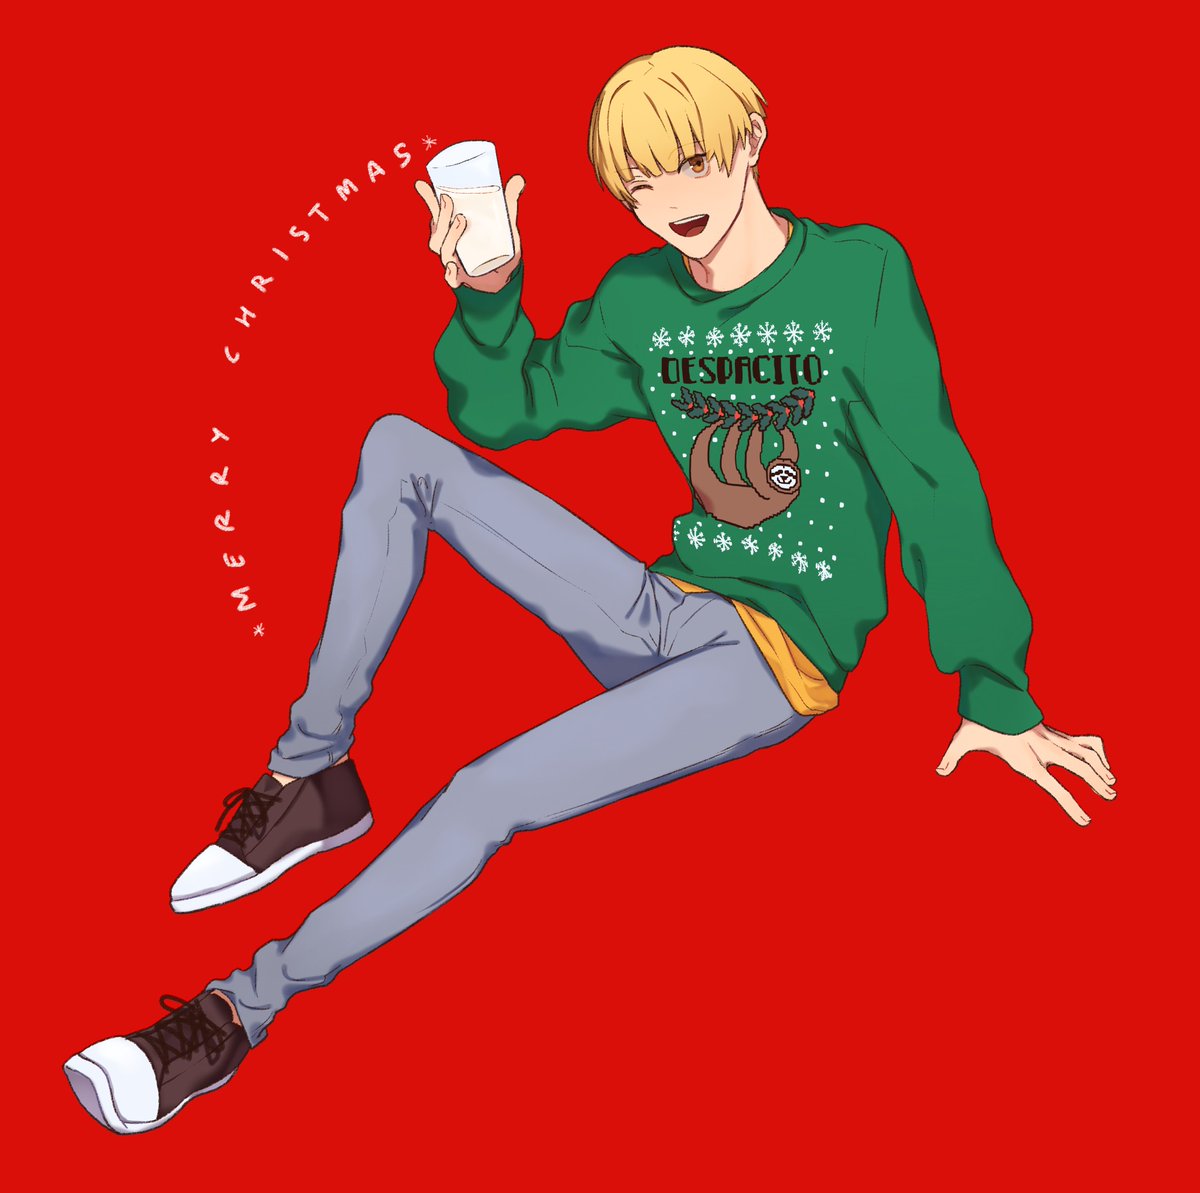 ??Merry Christmas and happy holidays!!!!??
Here's the sweater art for four lucky people!!
Thank you so much to for joining!! Love all the sweater pics yall sent and the lovely messages too??? 